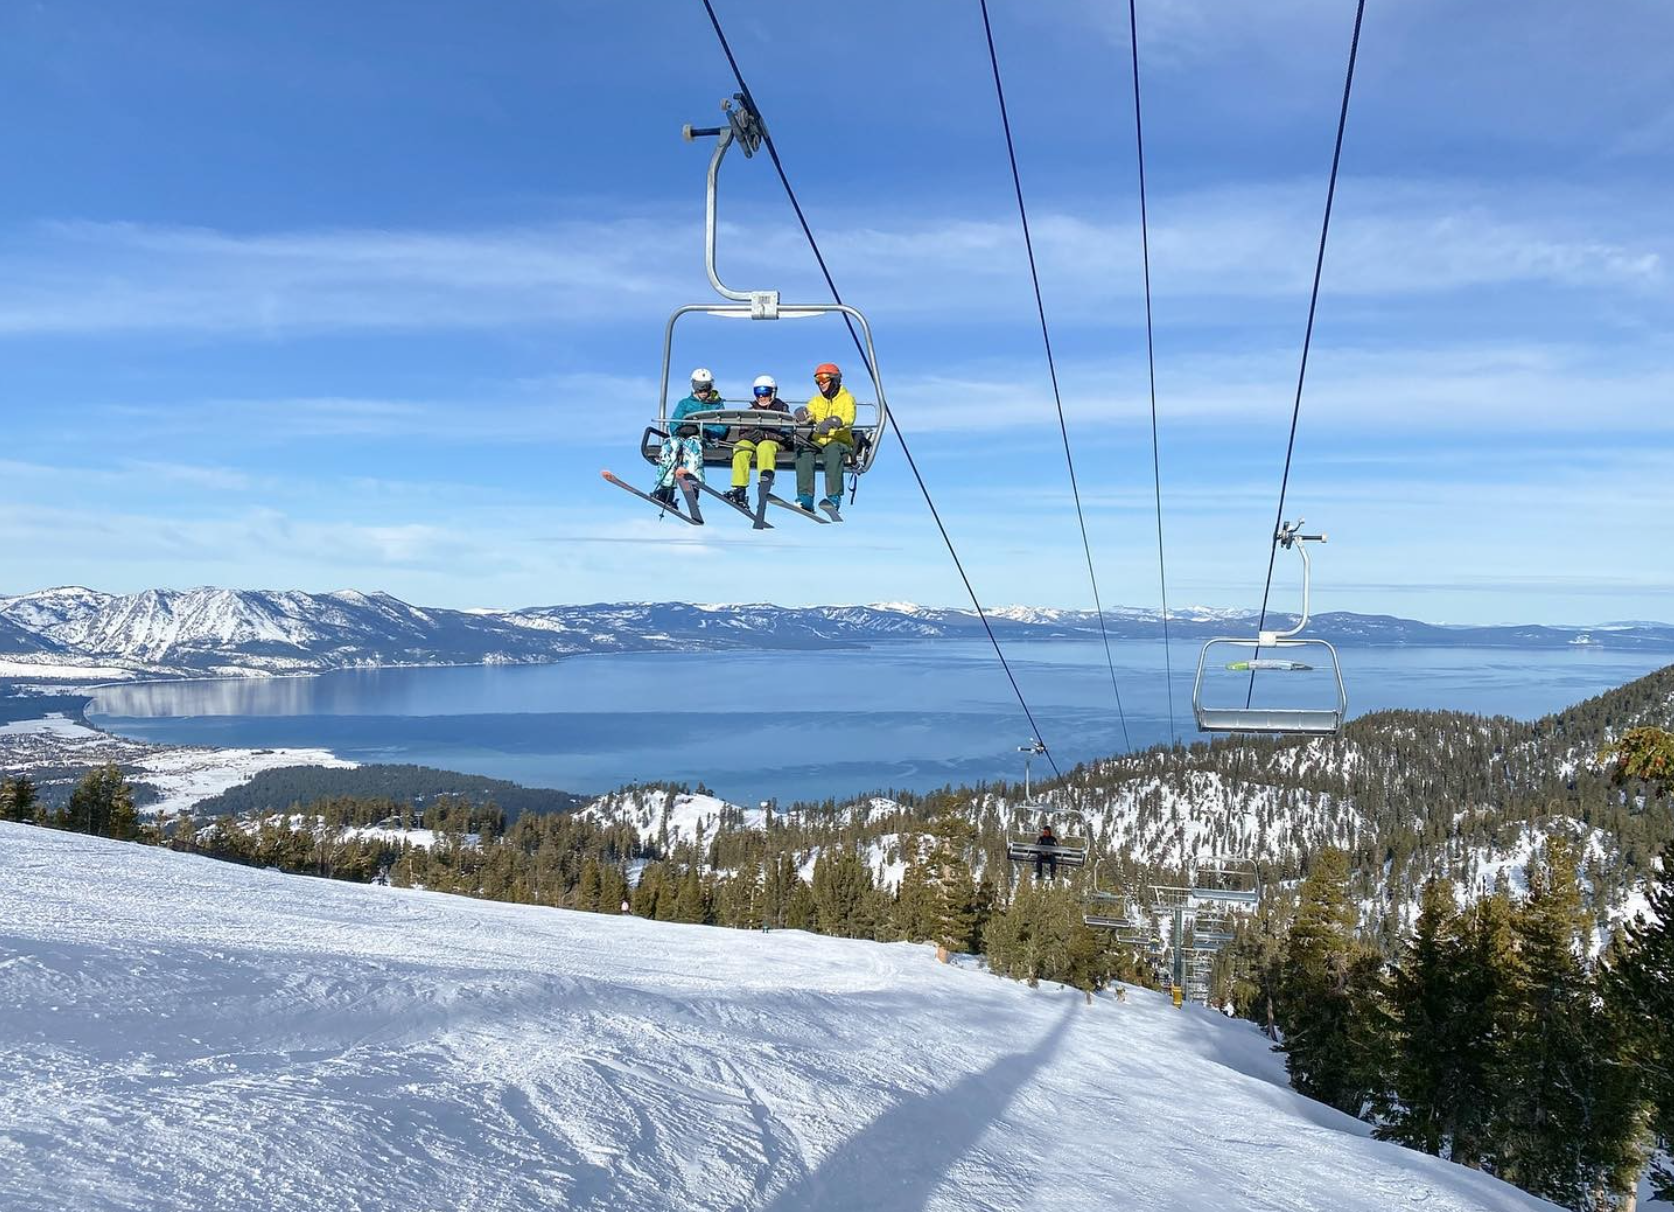 Vail Resorts Offers Millions to Settle Multiple Class Action Lawsuits